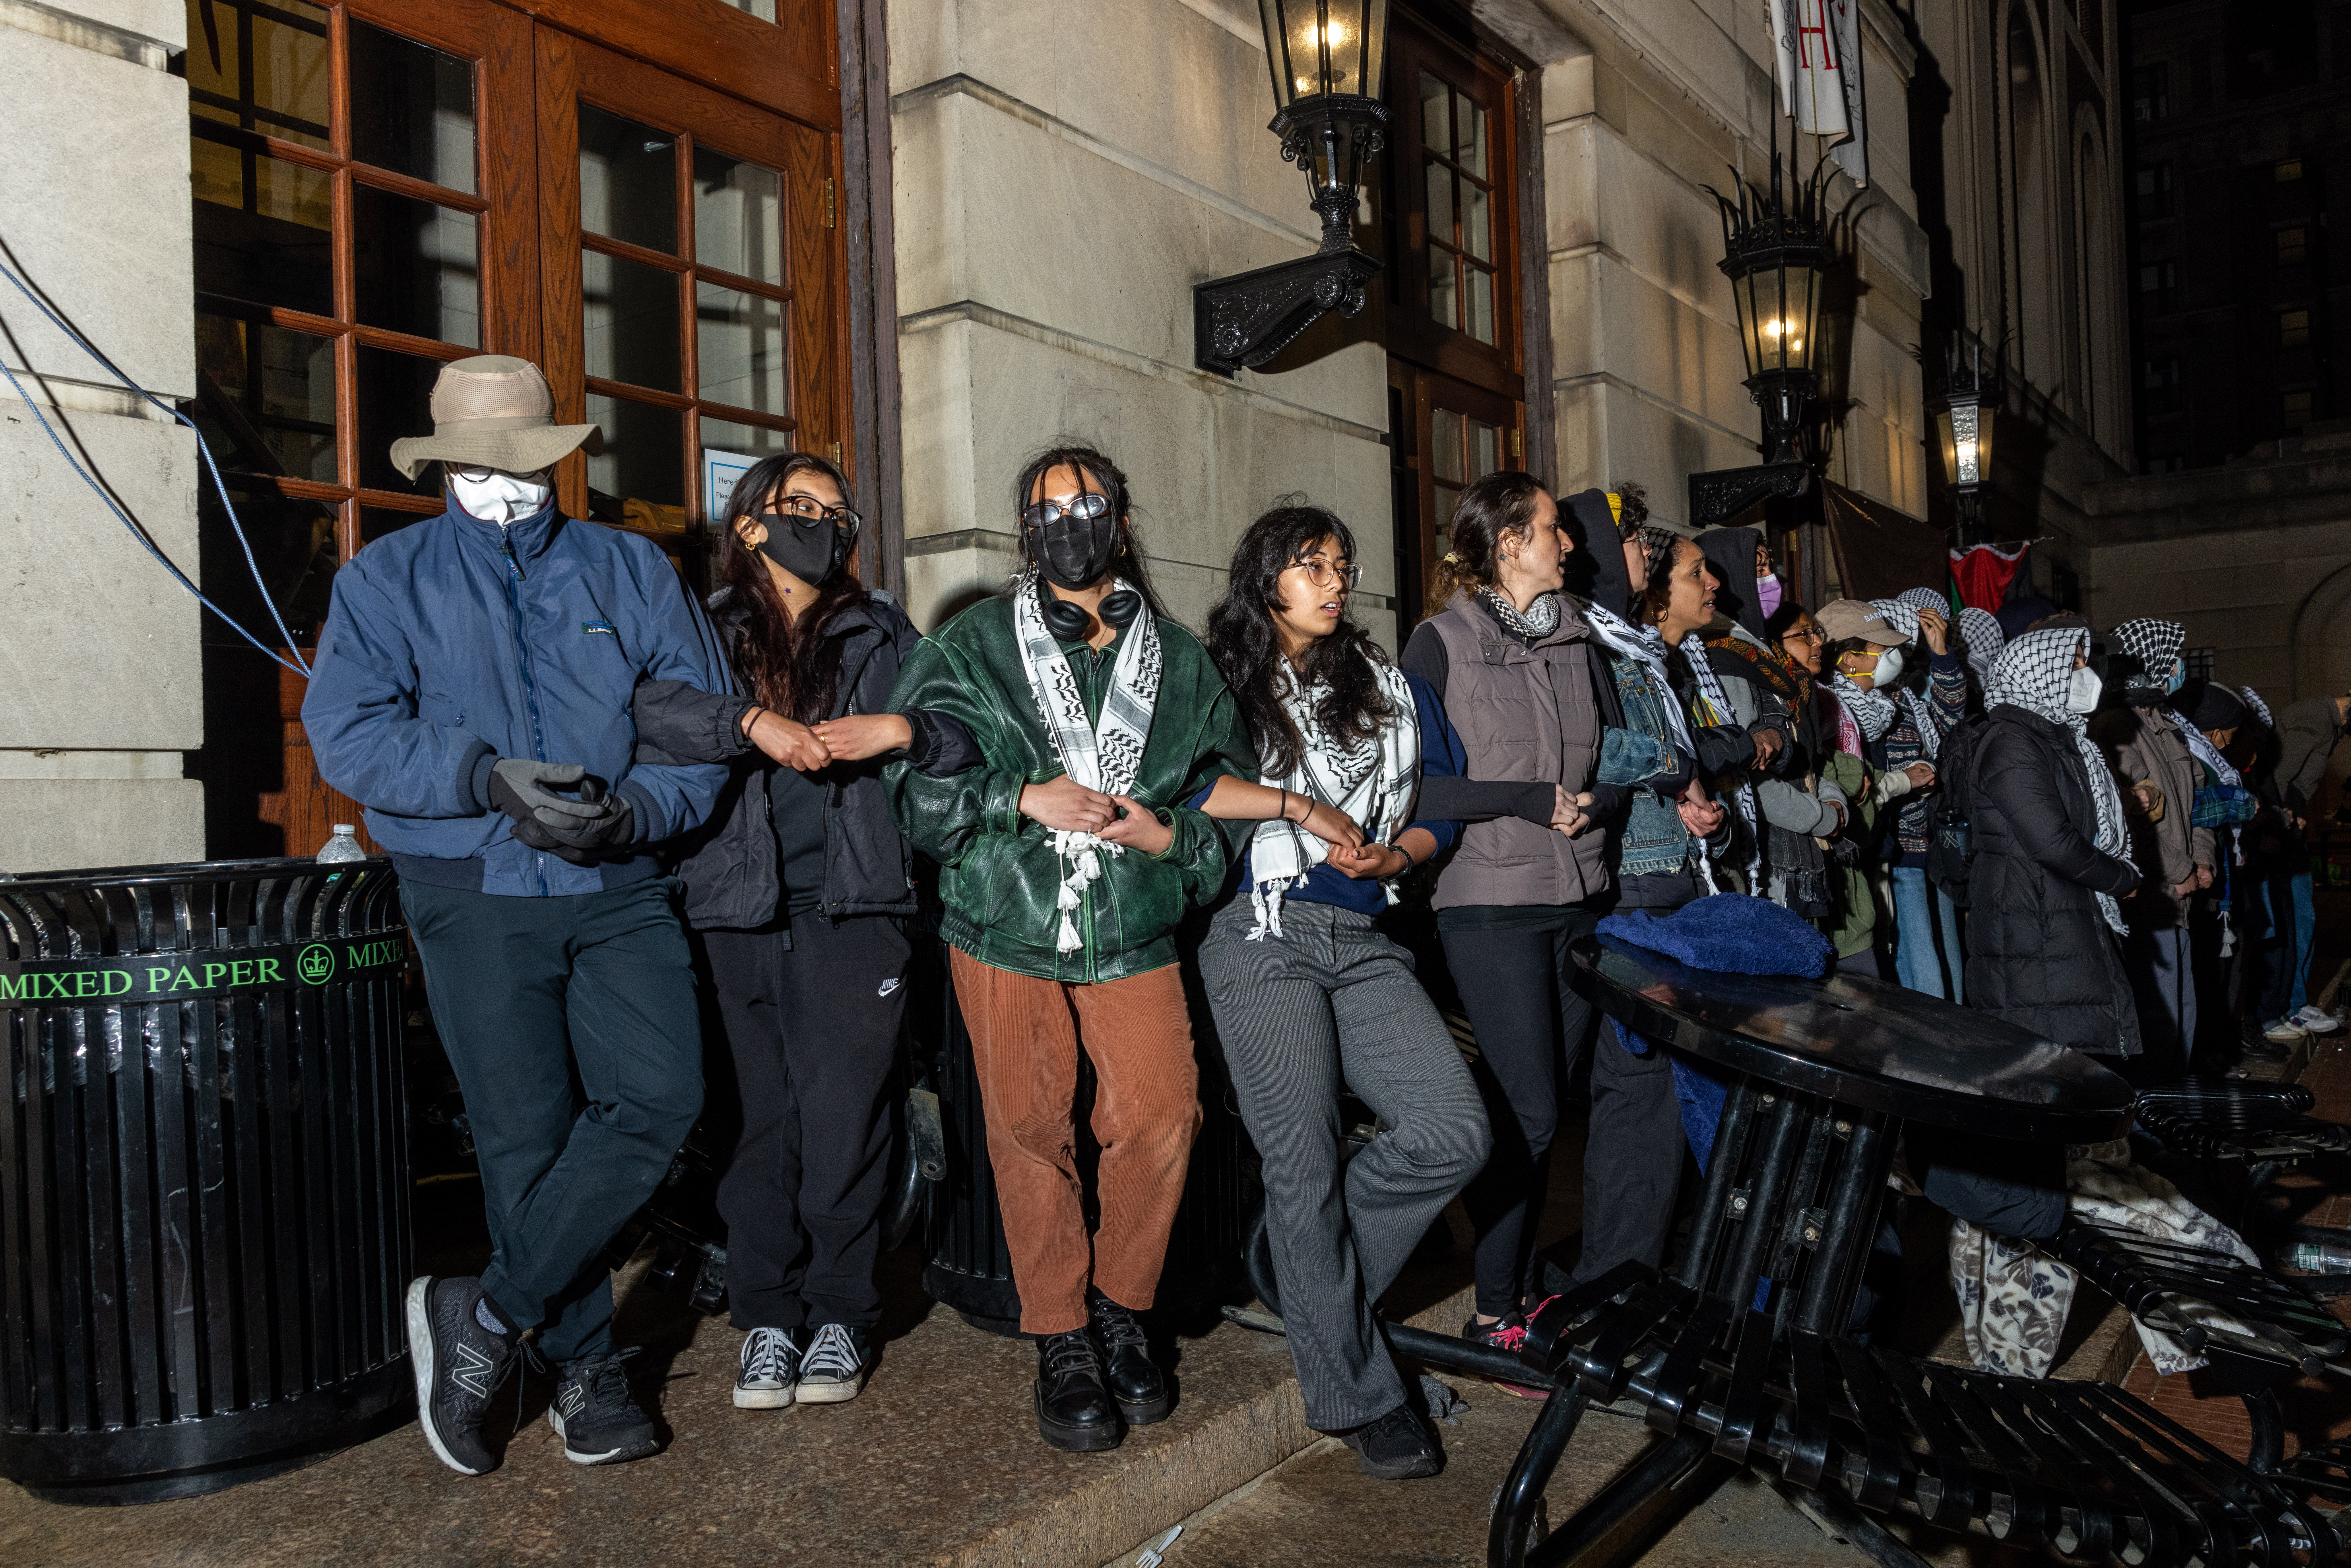 Demonstrators link arms to protect their fellow protestors barricaded inside Hamilton Hall on Tuesday evening